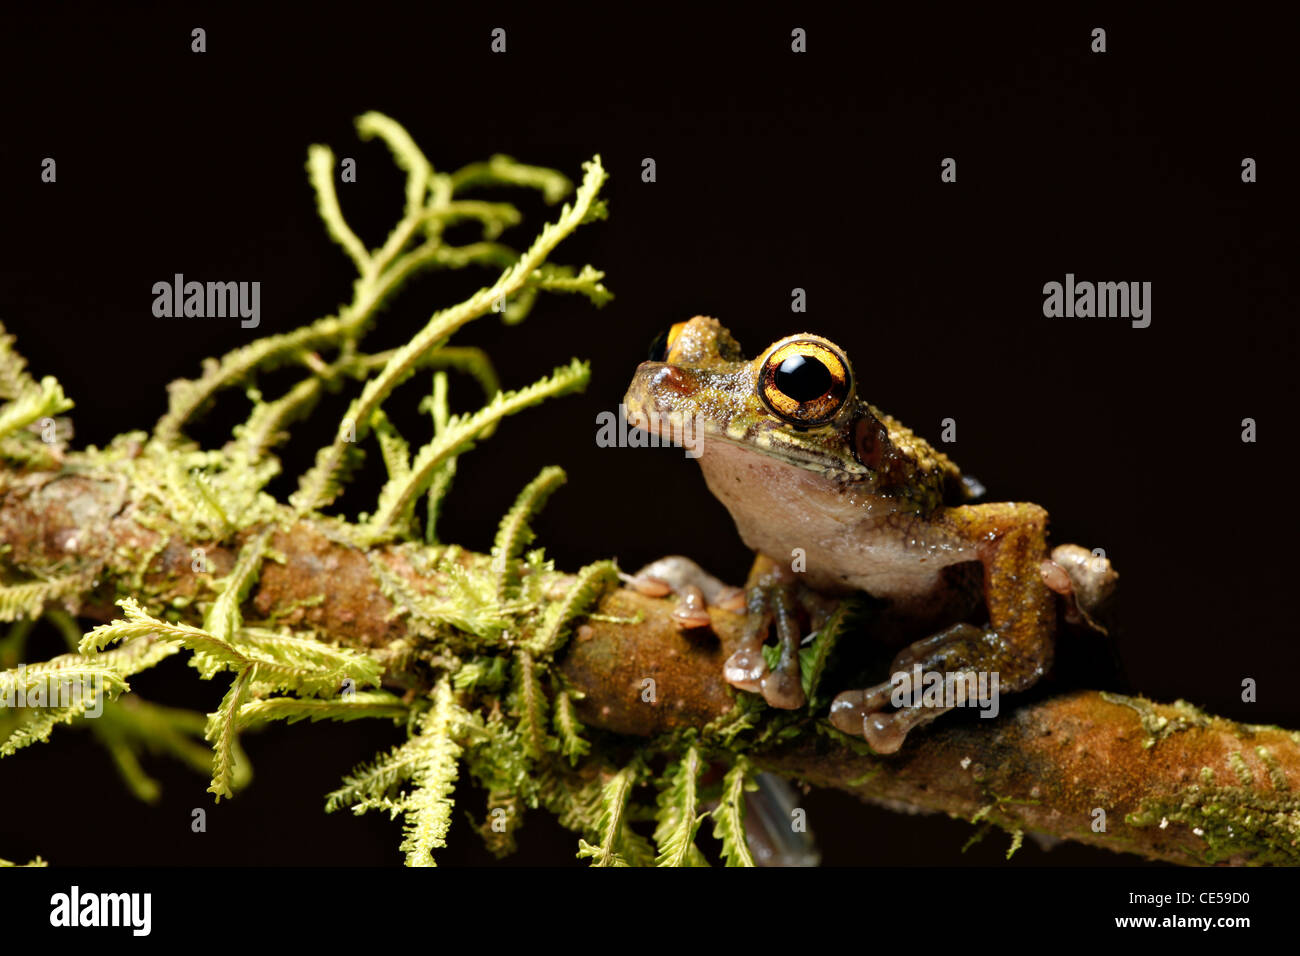 Osteocephalus leprieurii tree frog in the Amazon rain forest sitting between moss on a twig Stock Photo